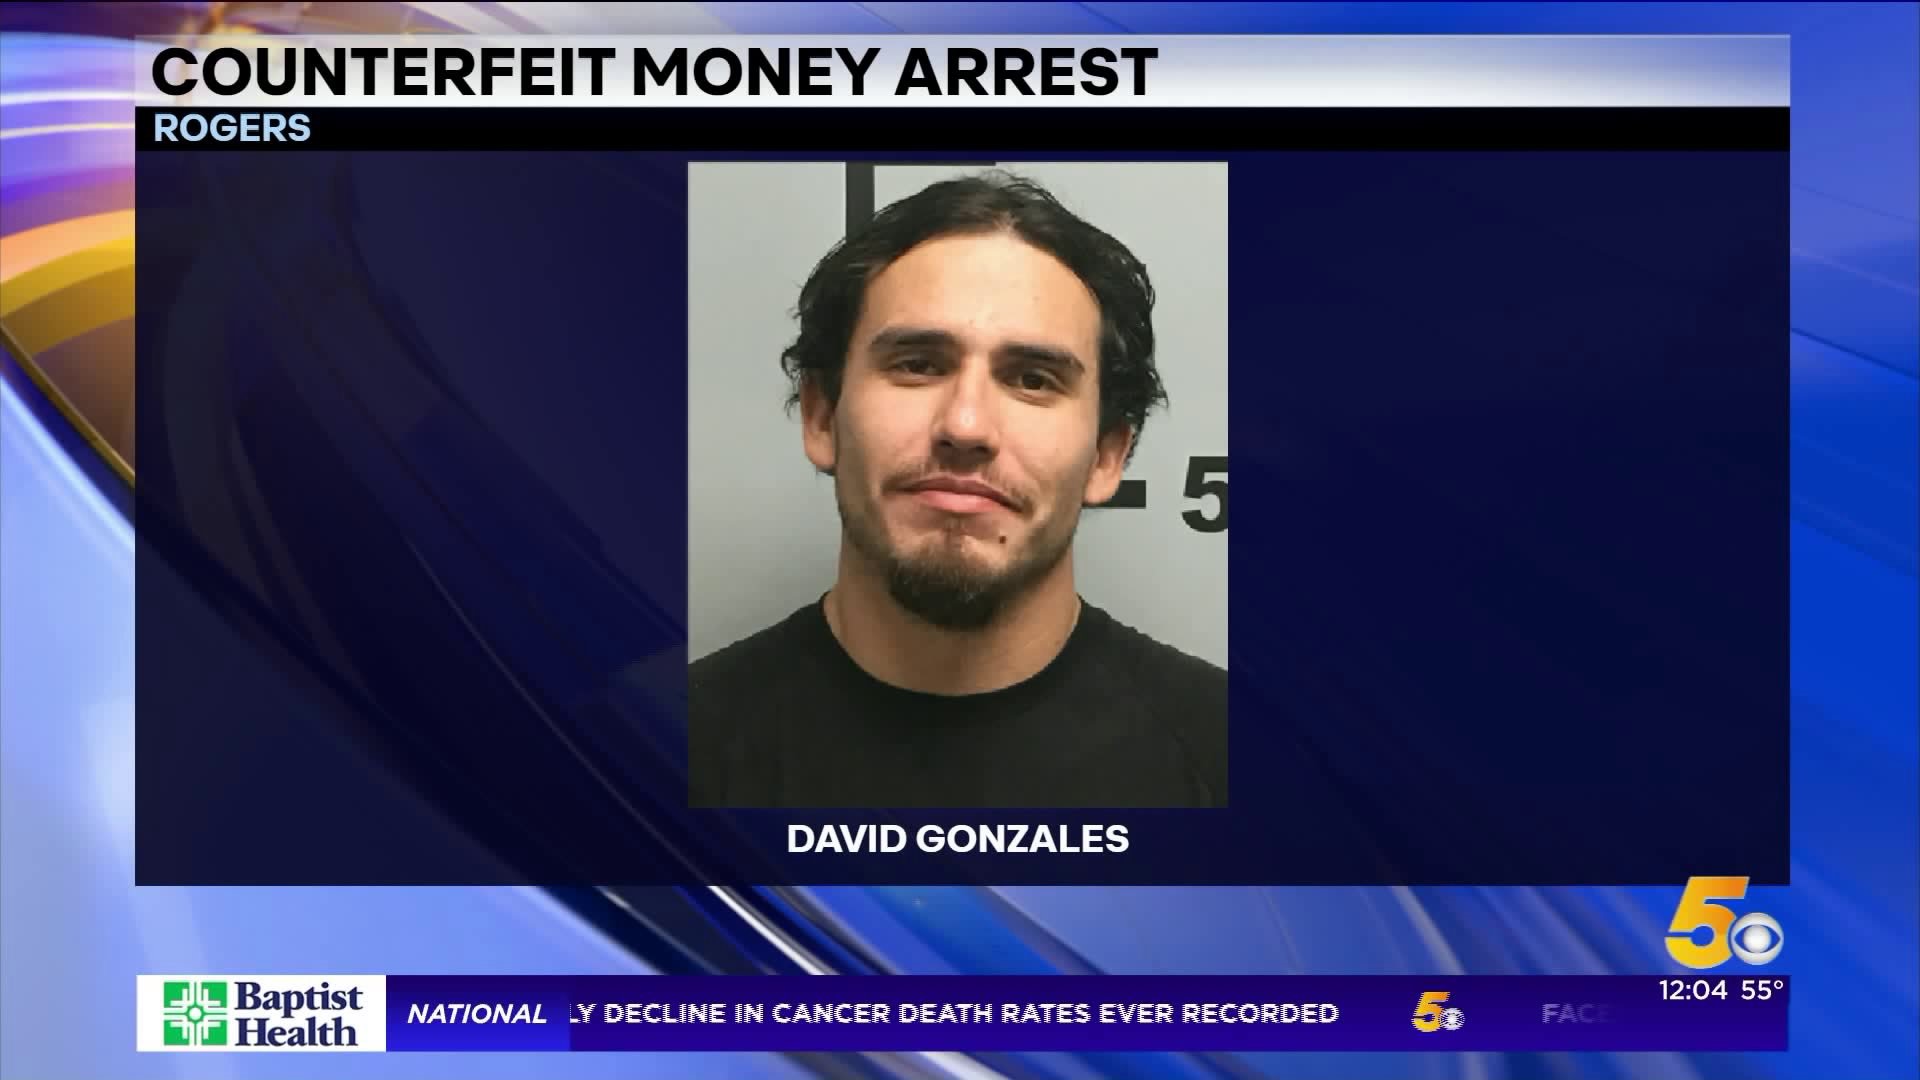 Man Arrested For Buying Beer With Counterfeit Money